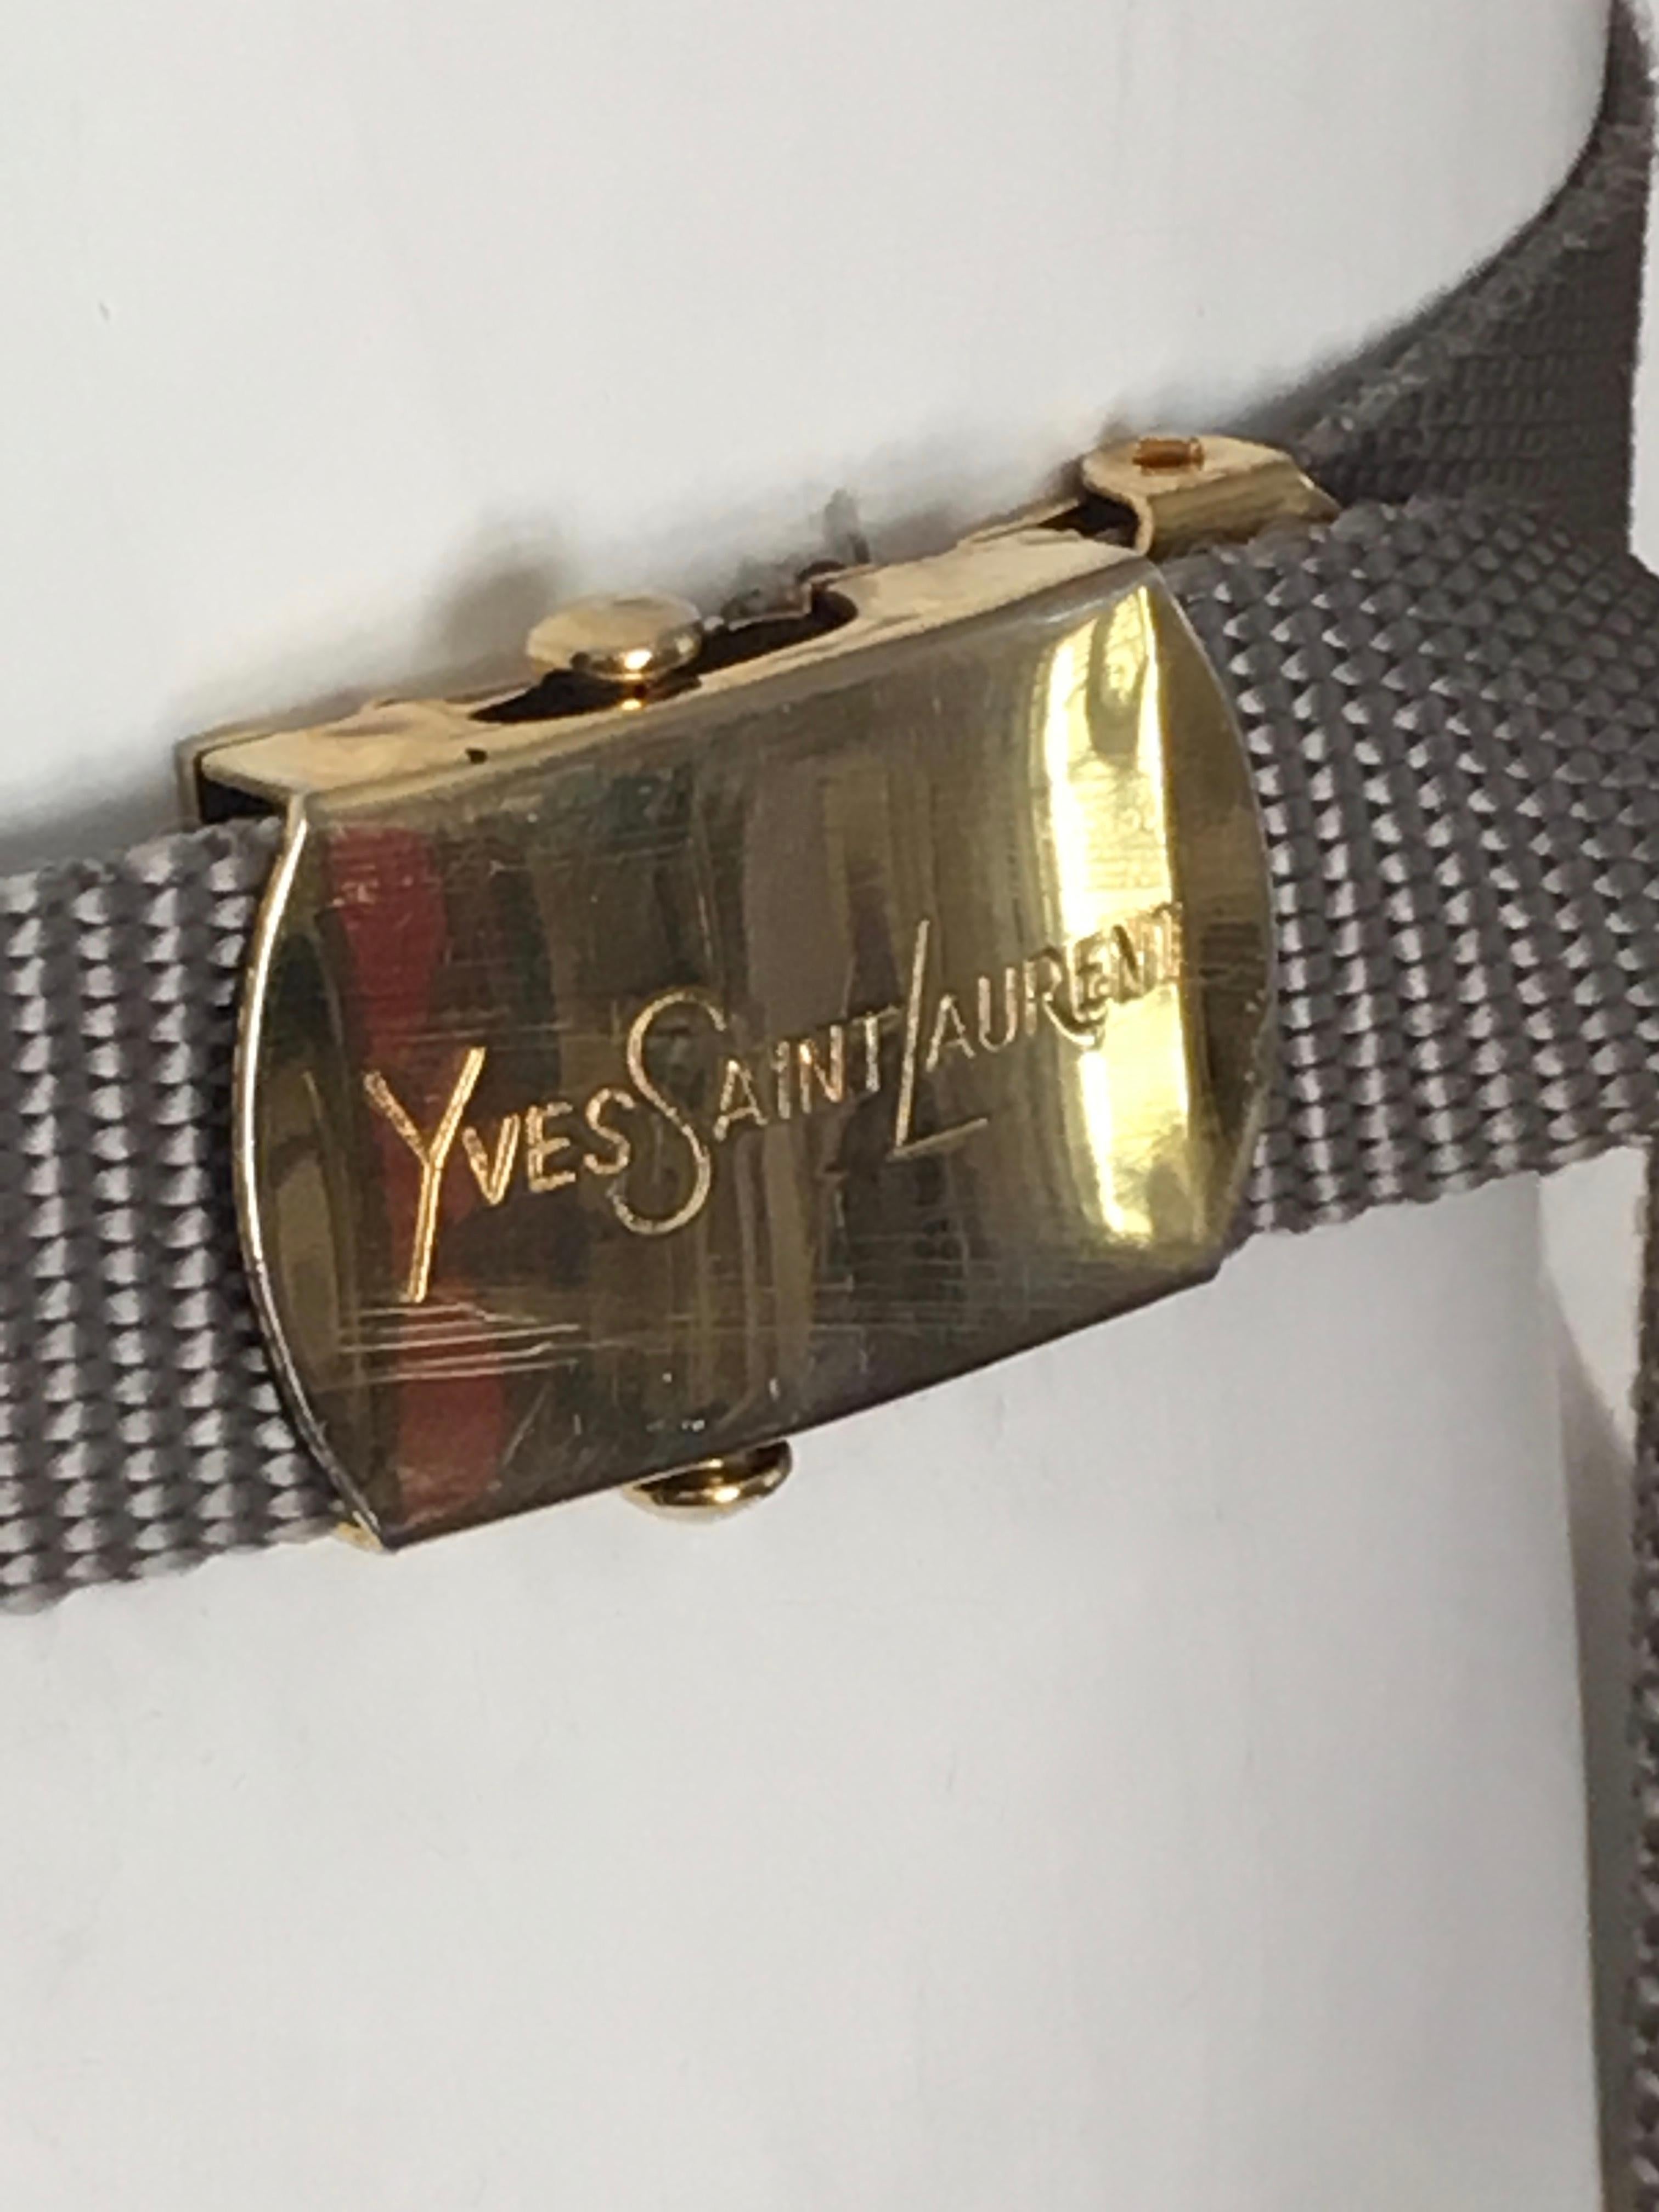 Yves Saint Laurent 1980s grey nylon woven strap with brass buckle belt is a size small.  This belt will fit an USA size 2 / 4.  This YSL nylon adjustable belt buckle has some age, as shown in photo but it is from the 80s and is consistent with age &